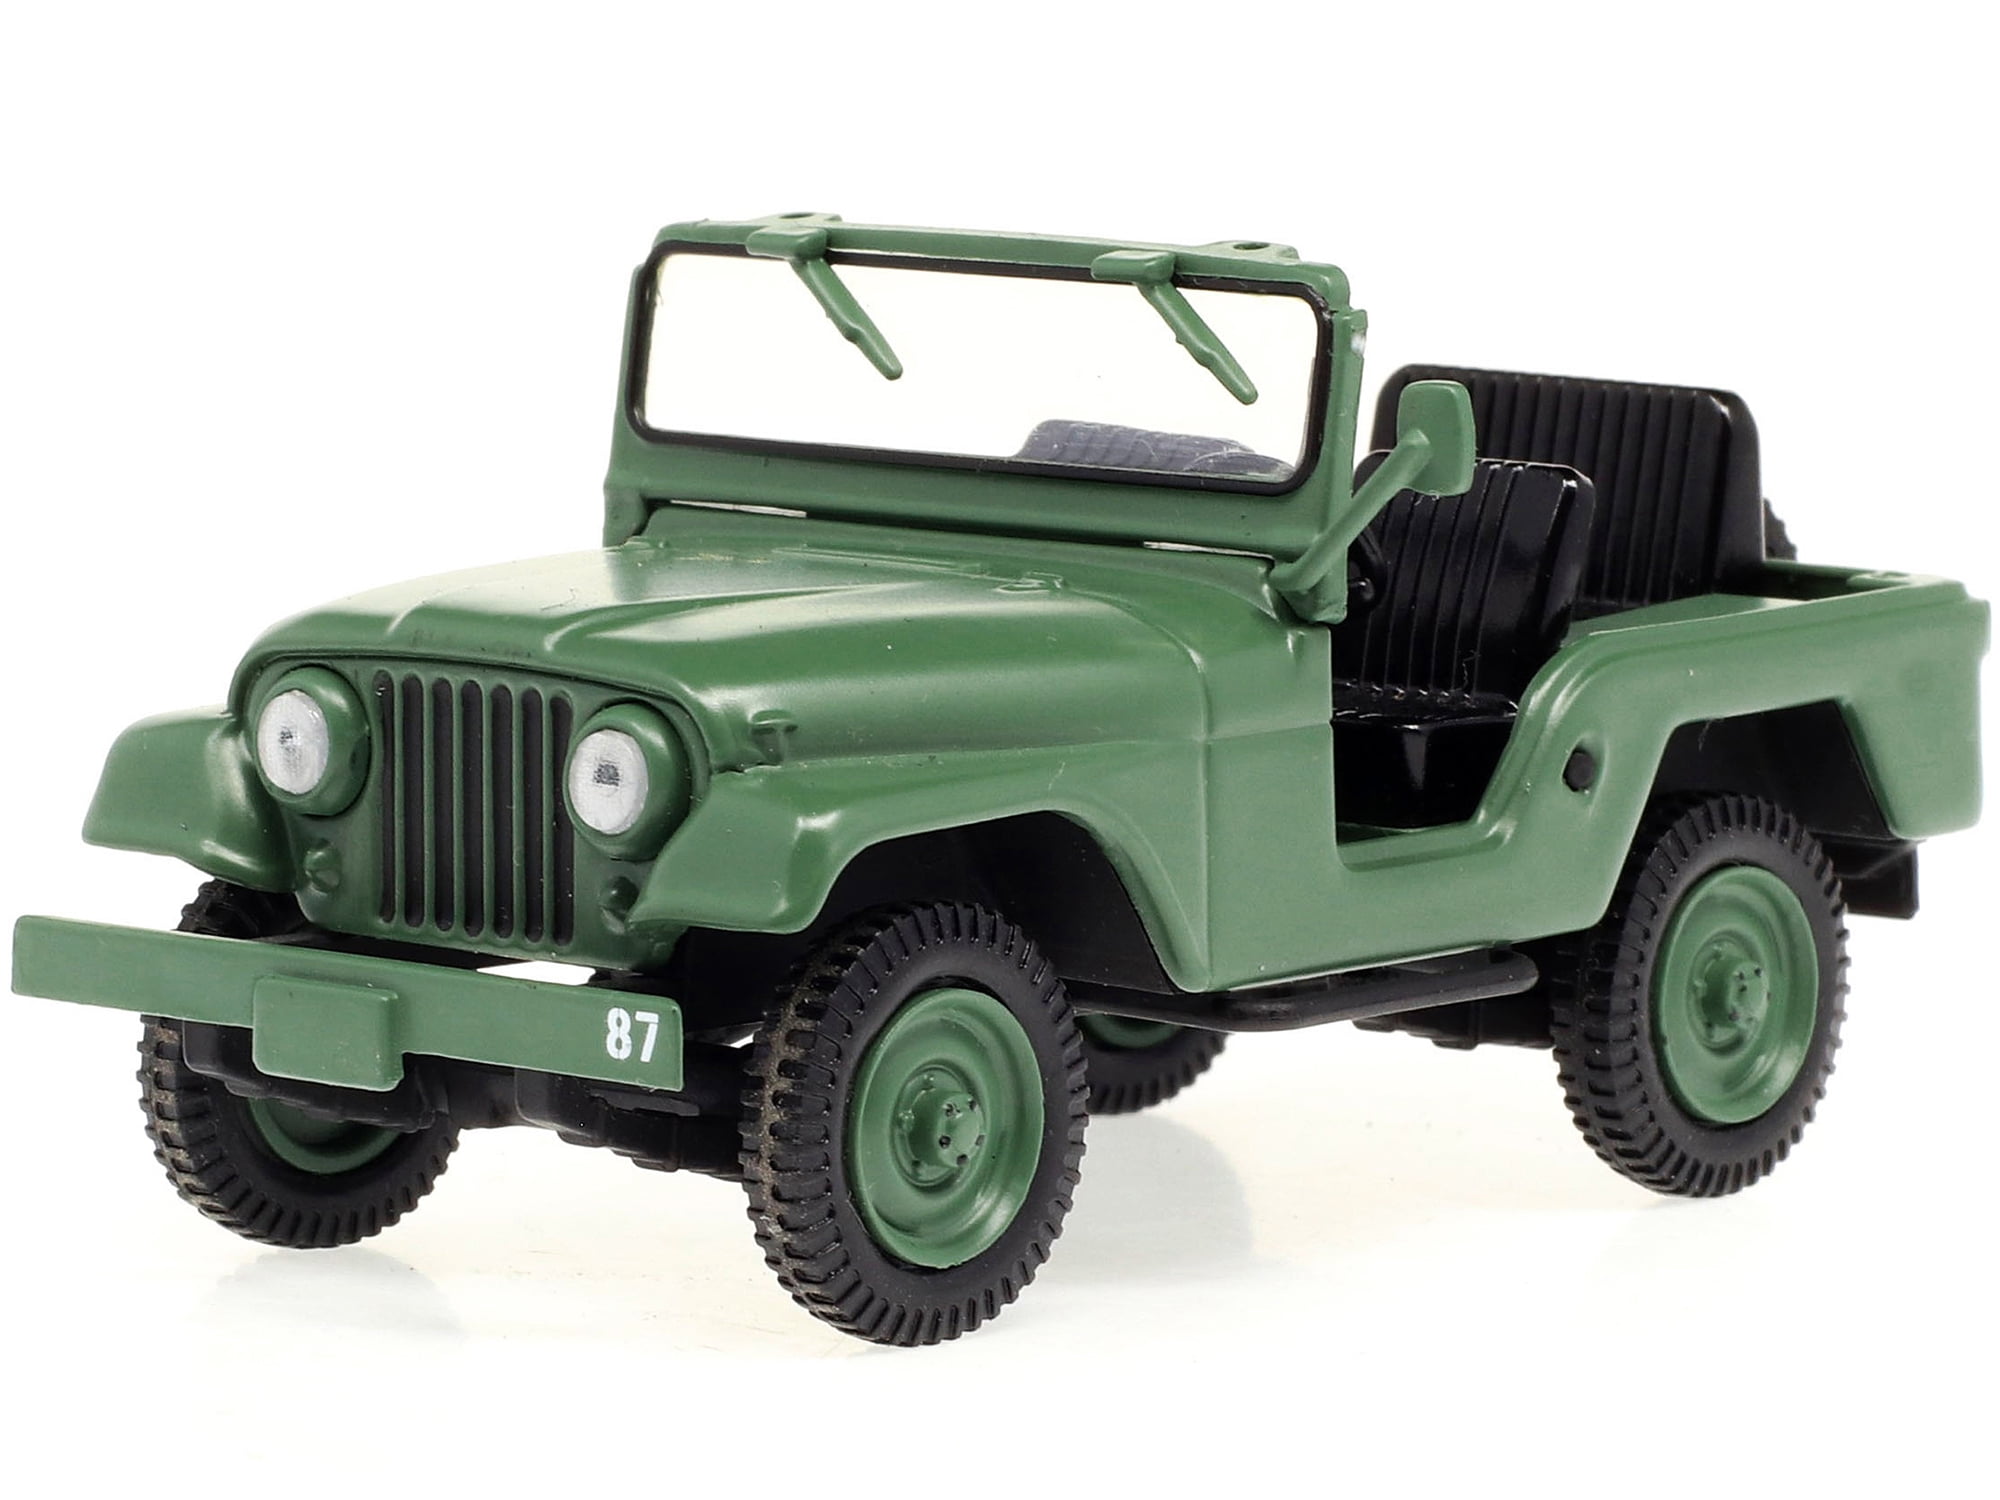 1952 WILLYS M38 A1 GREEN "CHARLIE'S ANGELS" TV SERIES 1/43 CAR GREENLIGHT 86606 